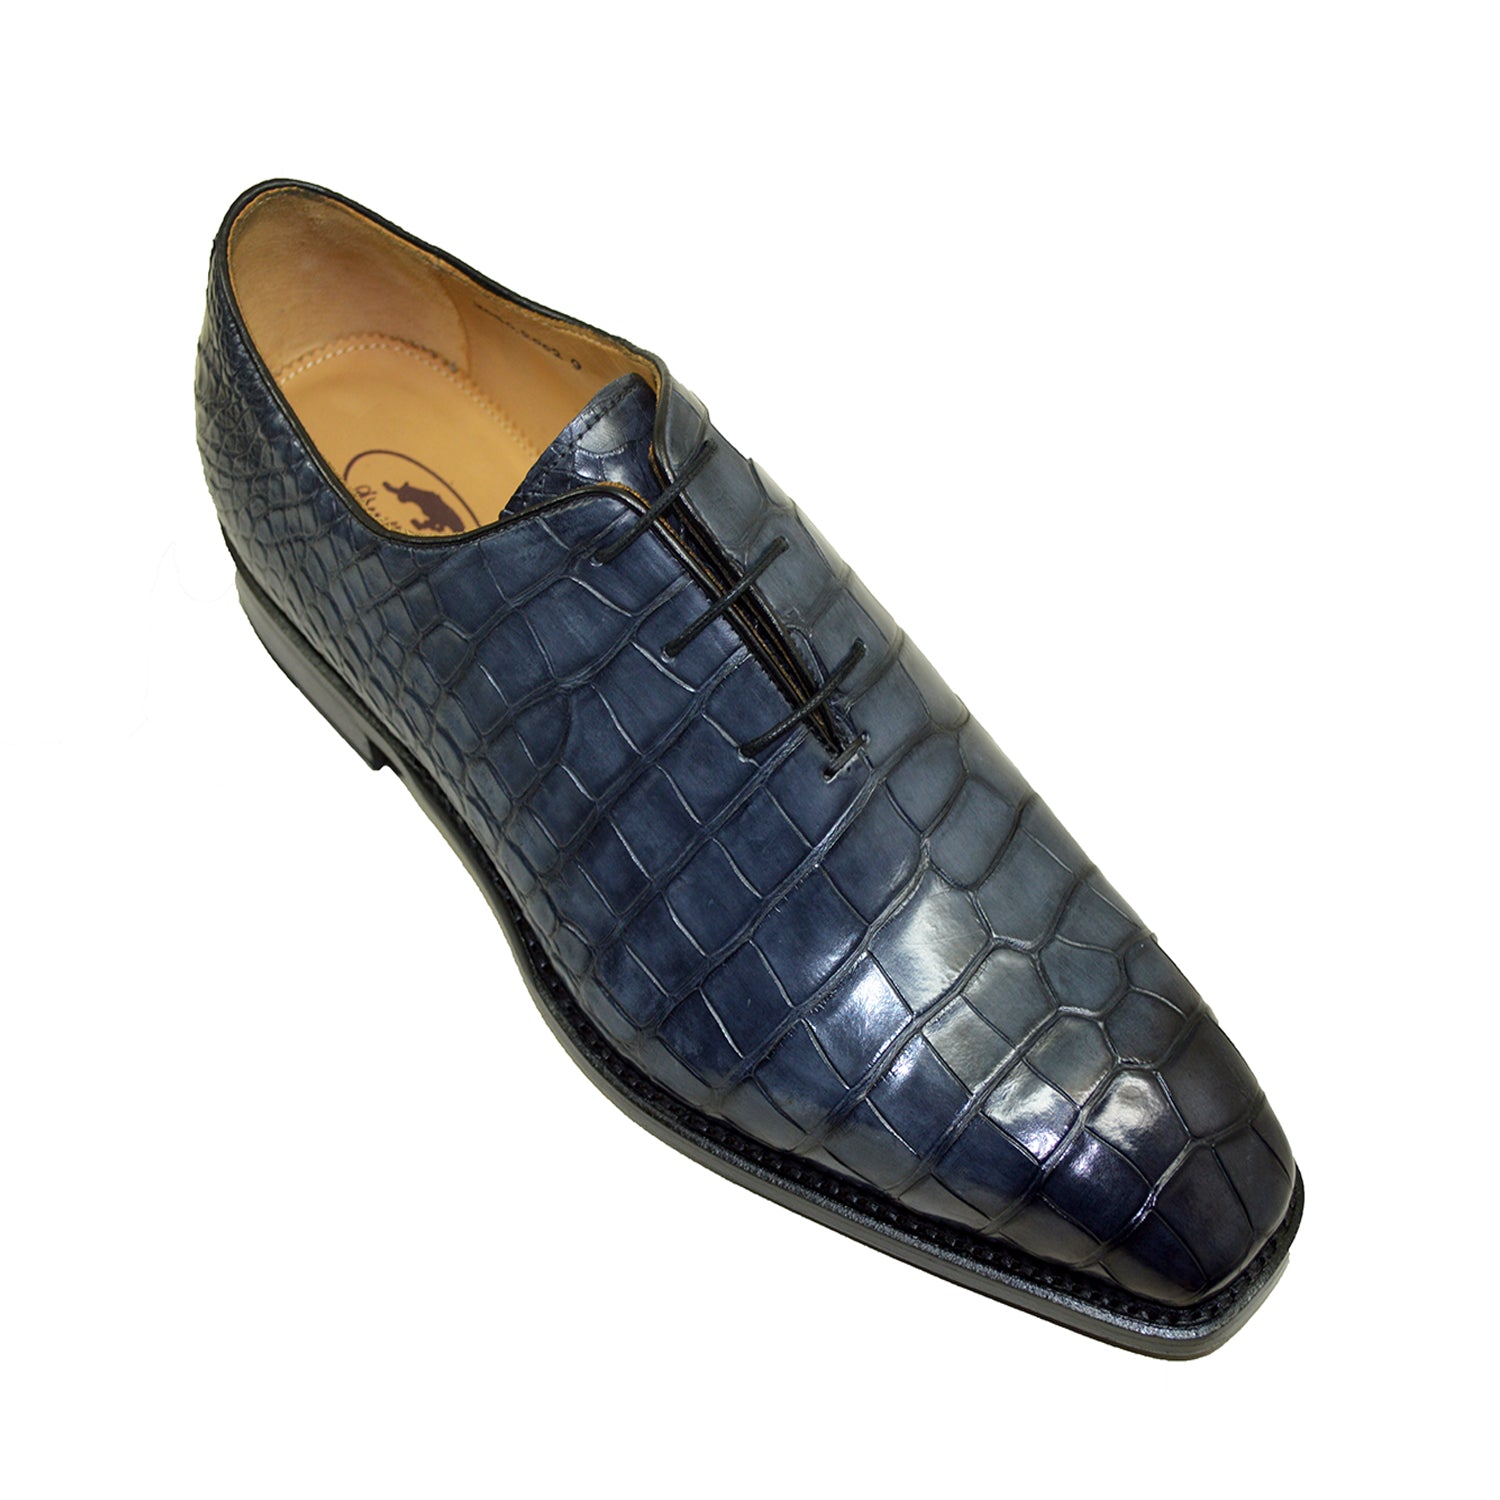 Sheriff Collection 2050 Charcoal Alligator Lace Up